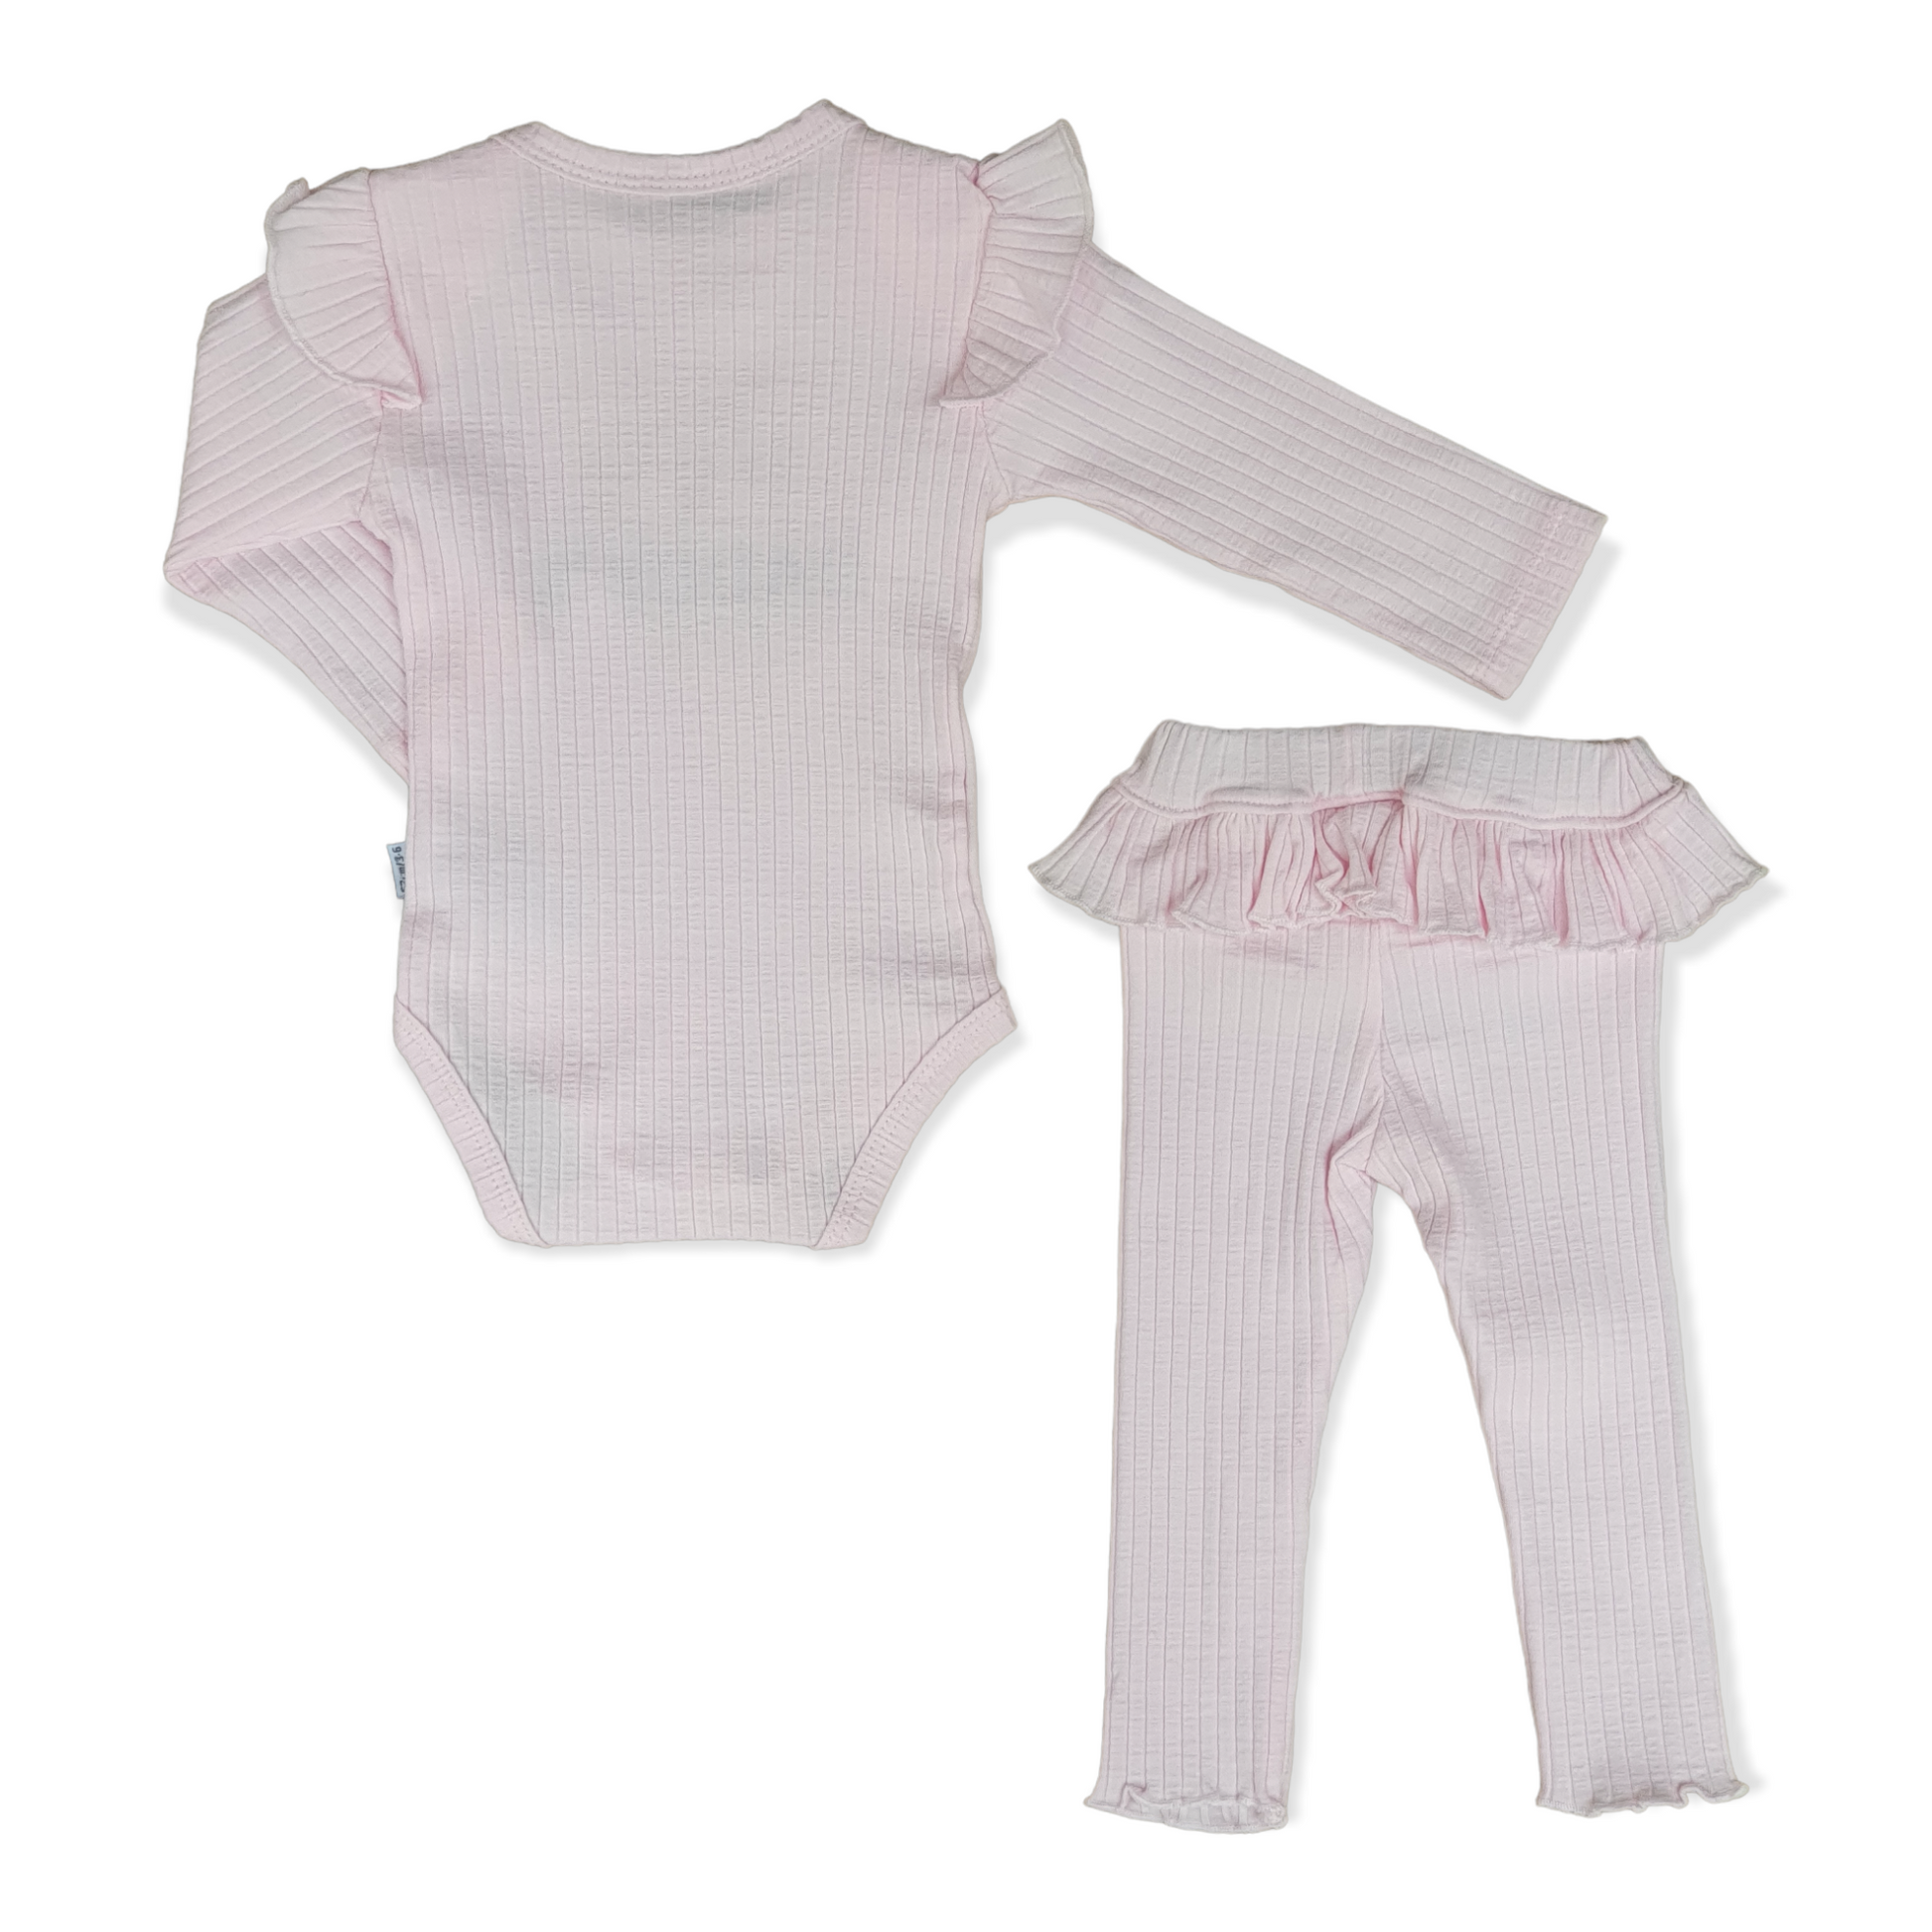 Pink Daddy's Girl Body with Pants-Body, Bodysuit, catgirl, catset2pcs, Creeper, Daddy, Footless, Girl, Long Sleeve, Onesie, Pants, Pink, Princess-Puan Baby-[Too Twee]-[Tootwee]-[baby]-[newborn]-[clothes]-[essentials]-[toys]-[Lebanon]